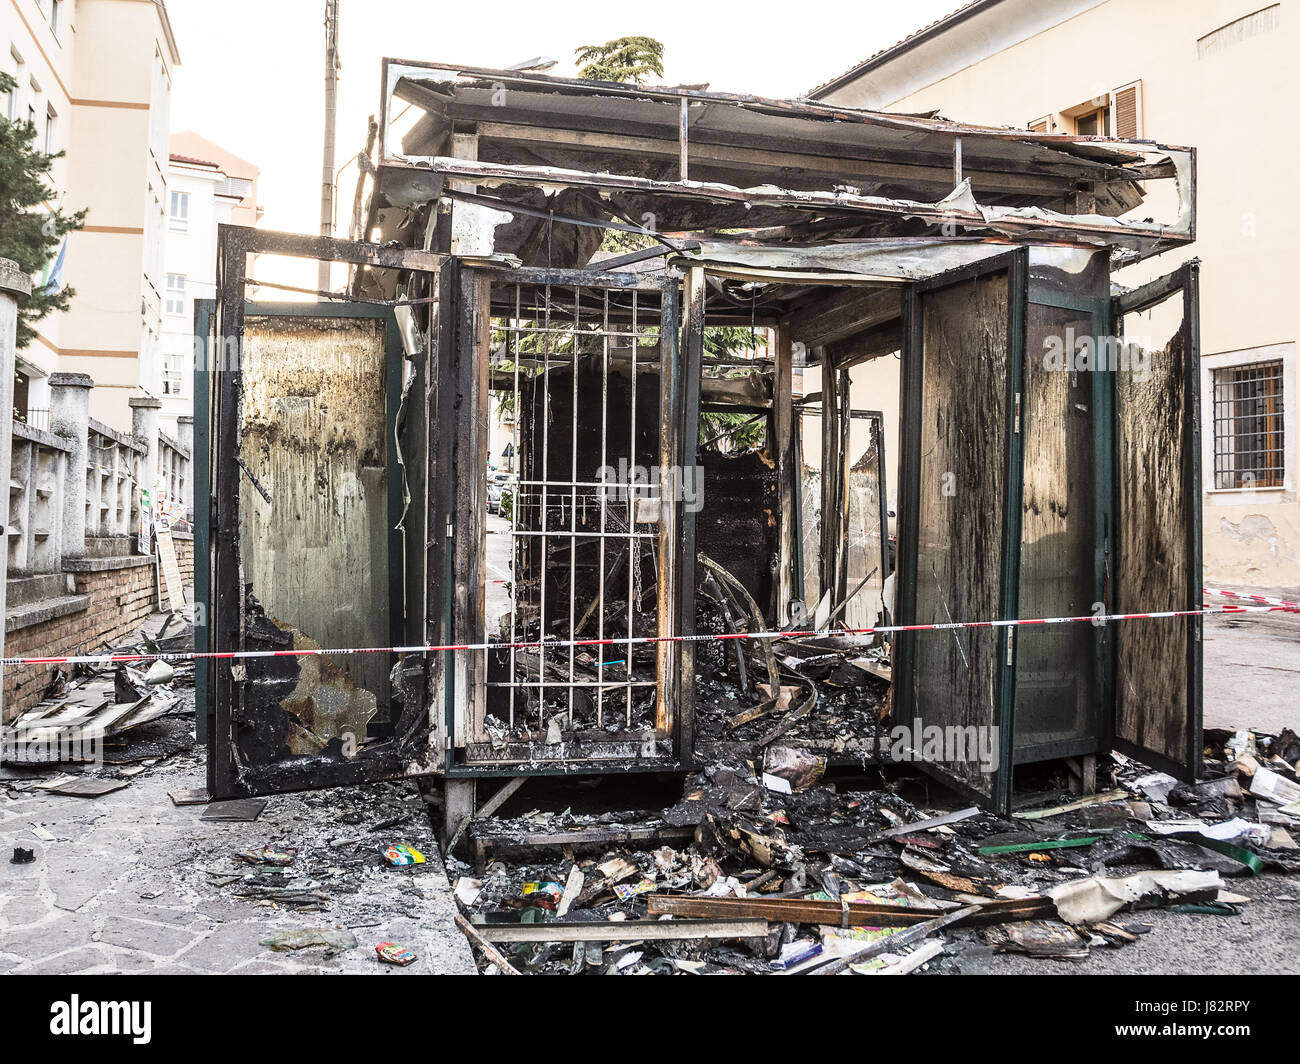 Chieti, Italy - March 19, 2017: Newsstand burned in the center of Chieti by vandals Stock Photo